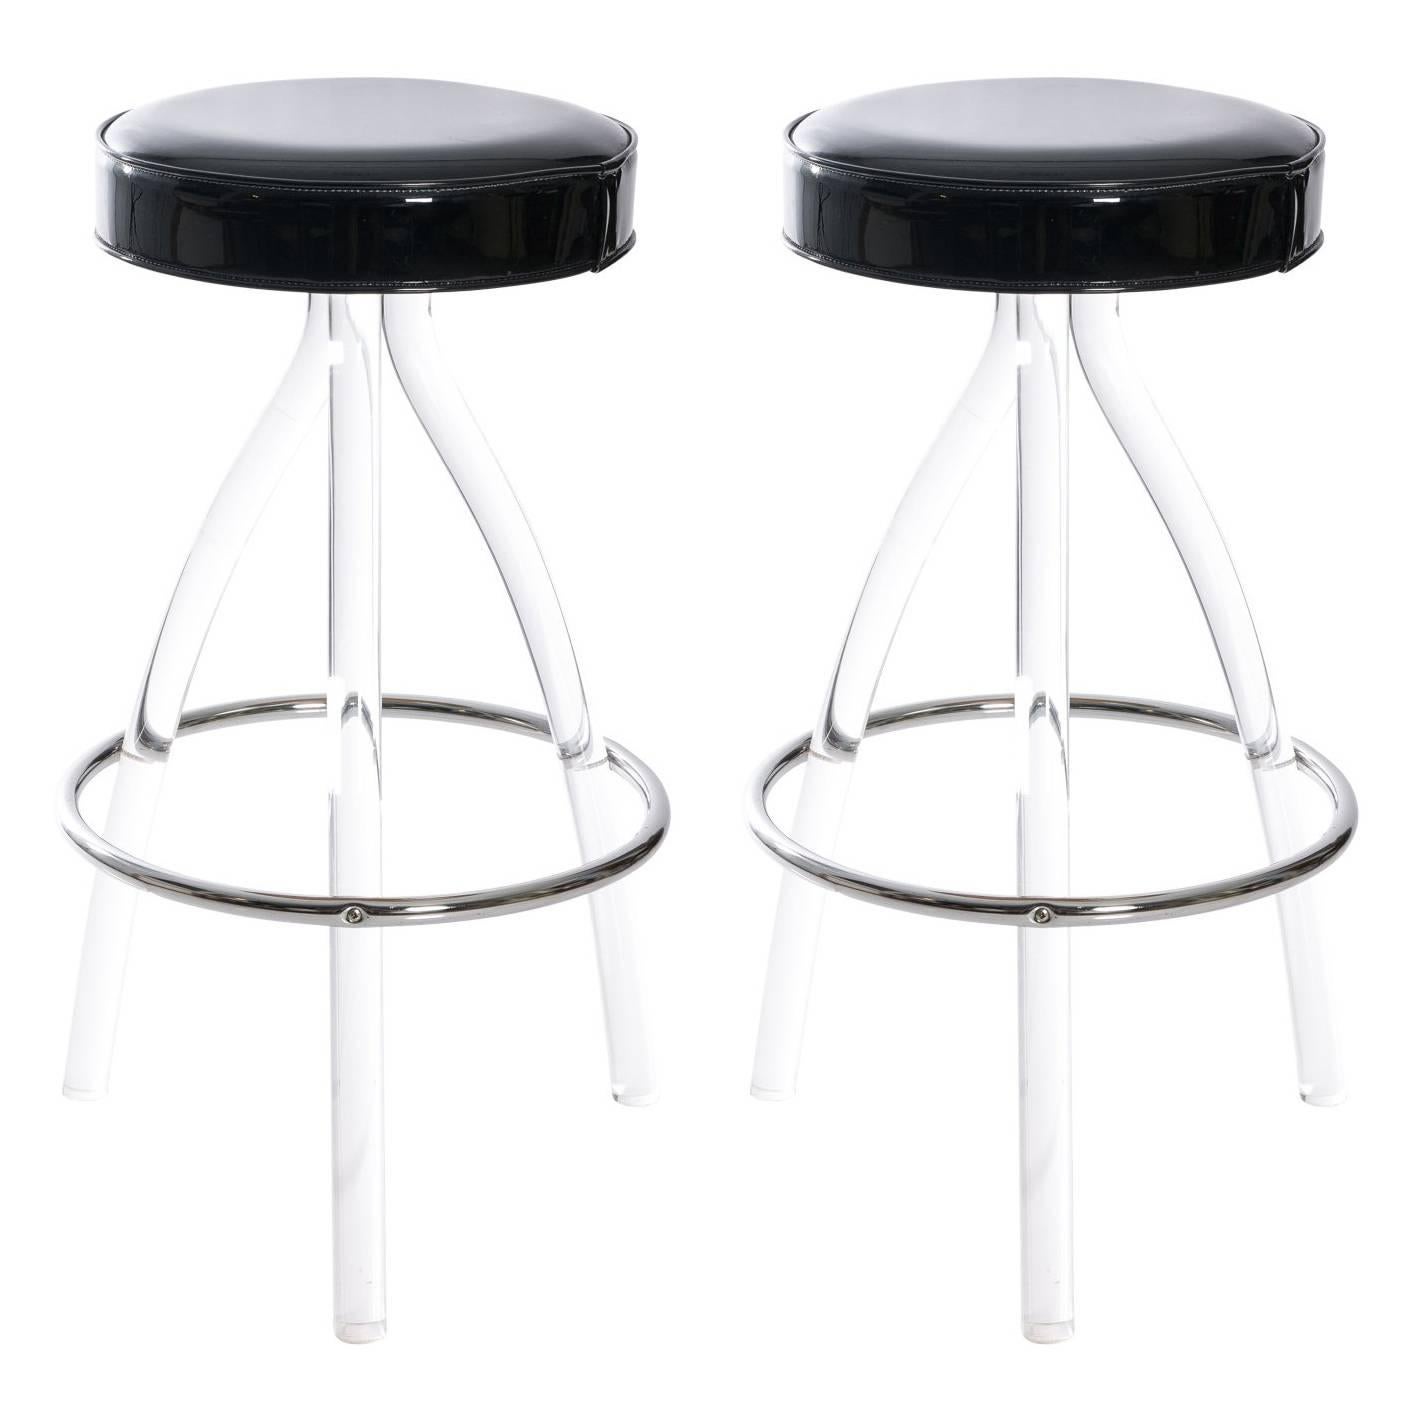 Hill Manufacturing Co. Bar Stools